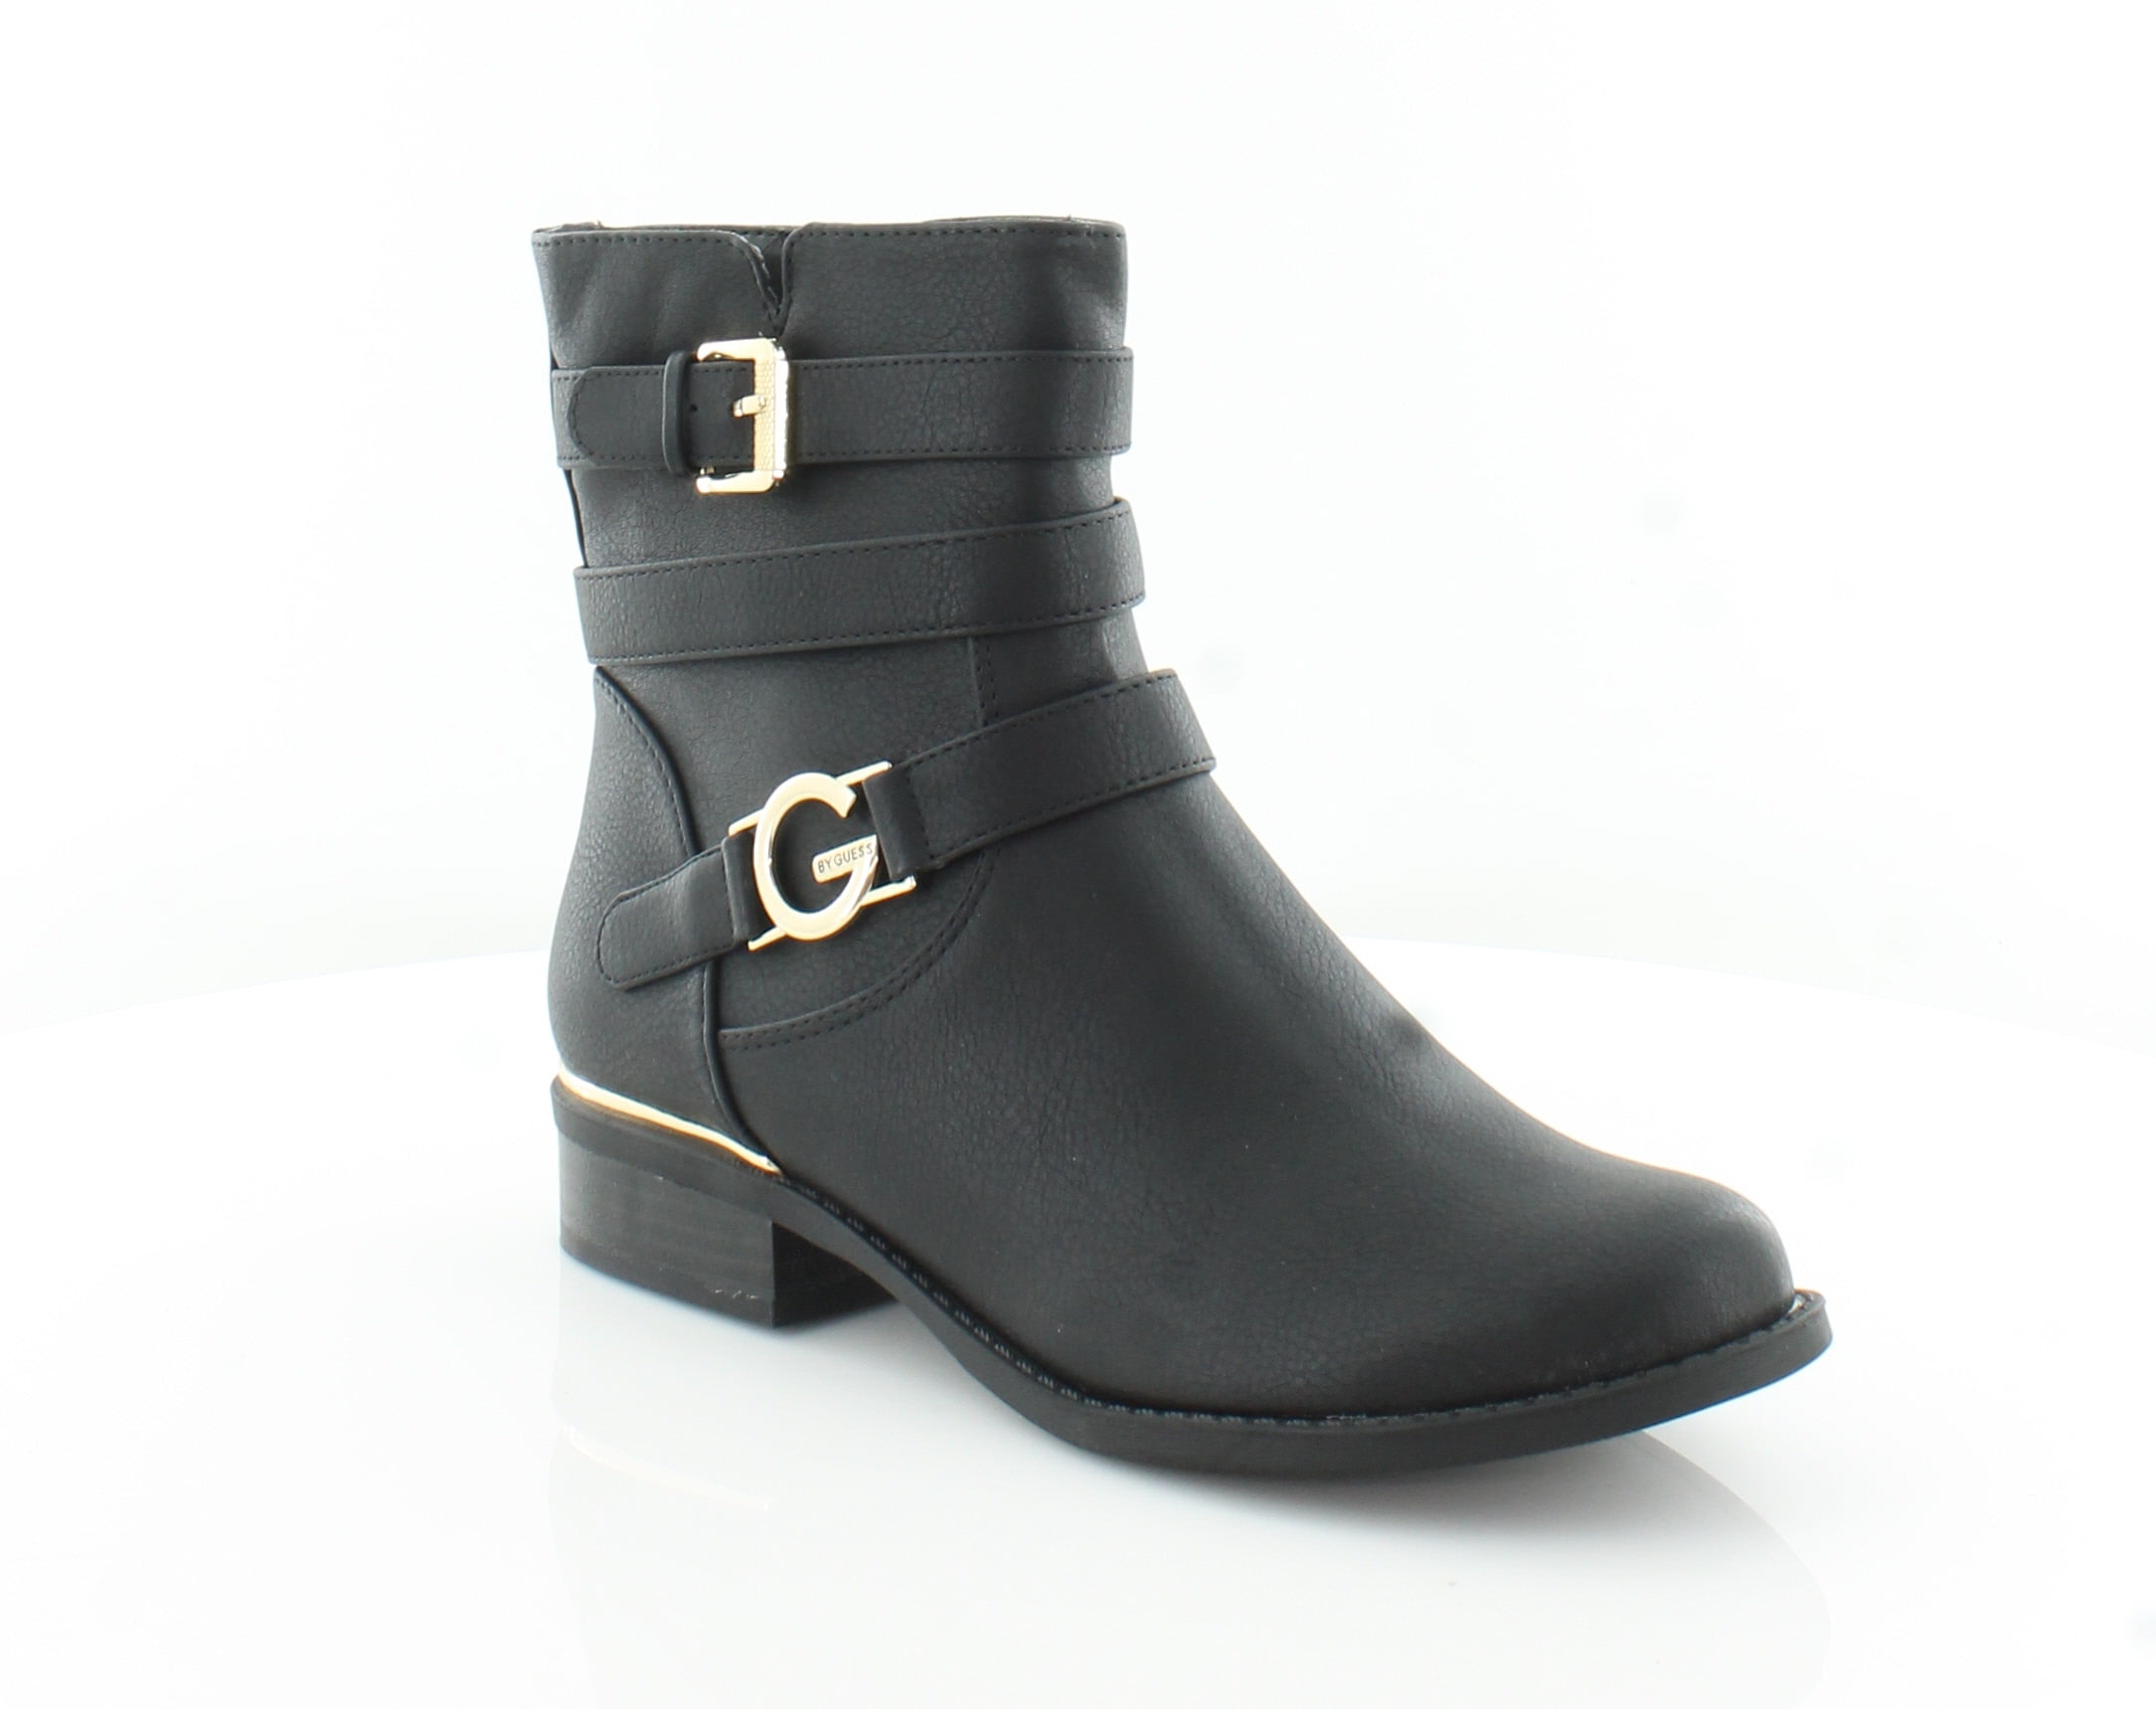 G by Guess Harlin Women's Boots Black 